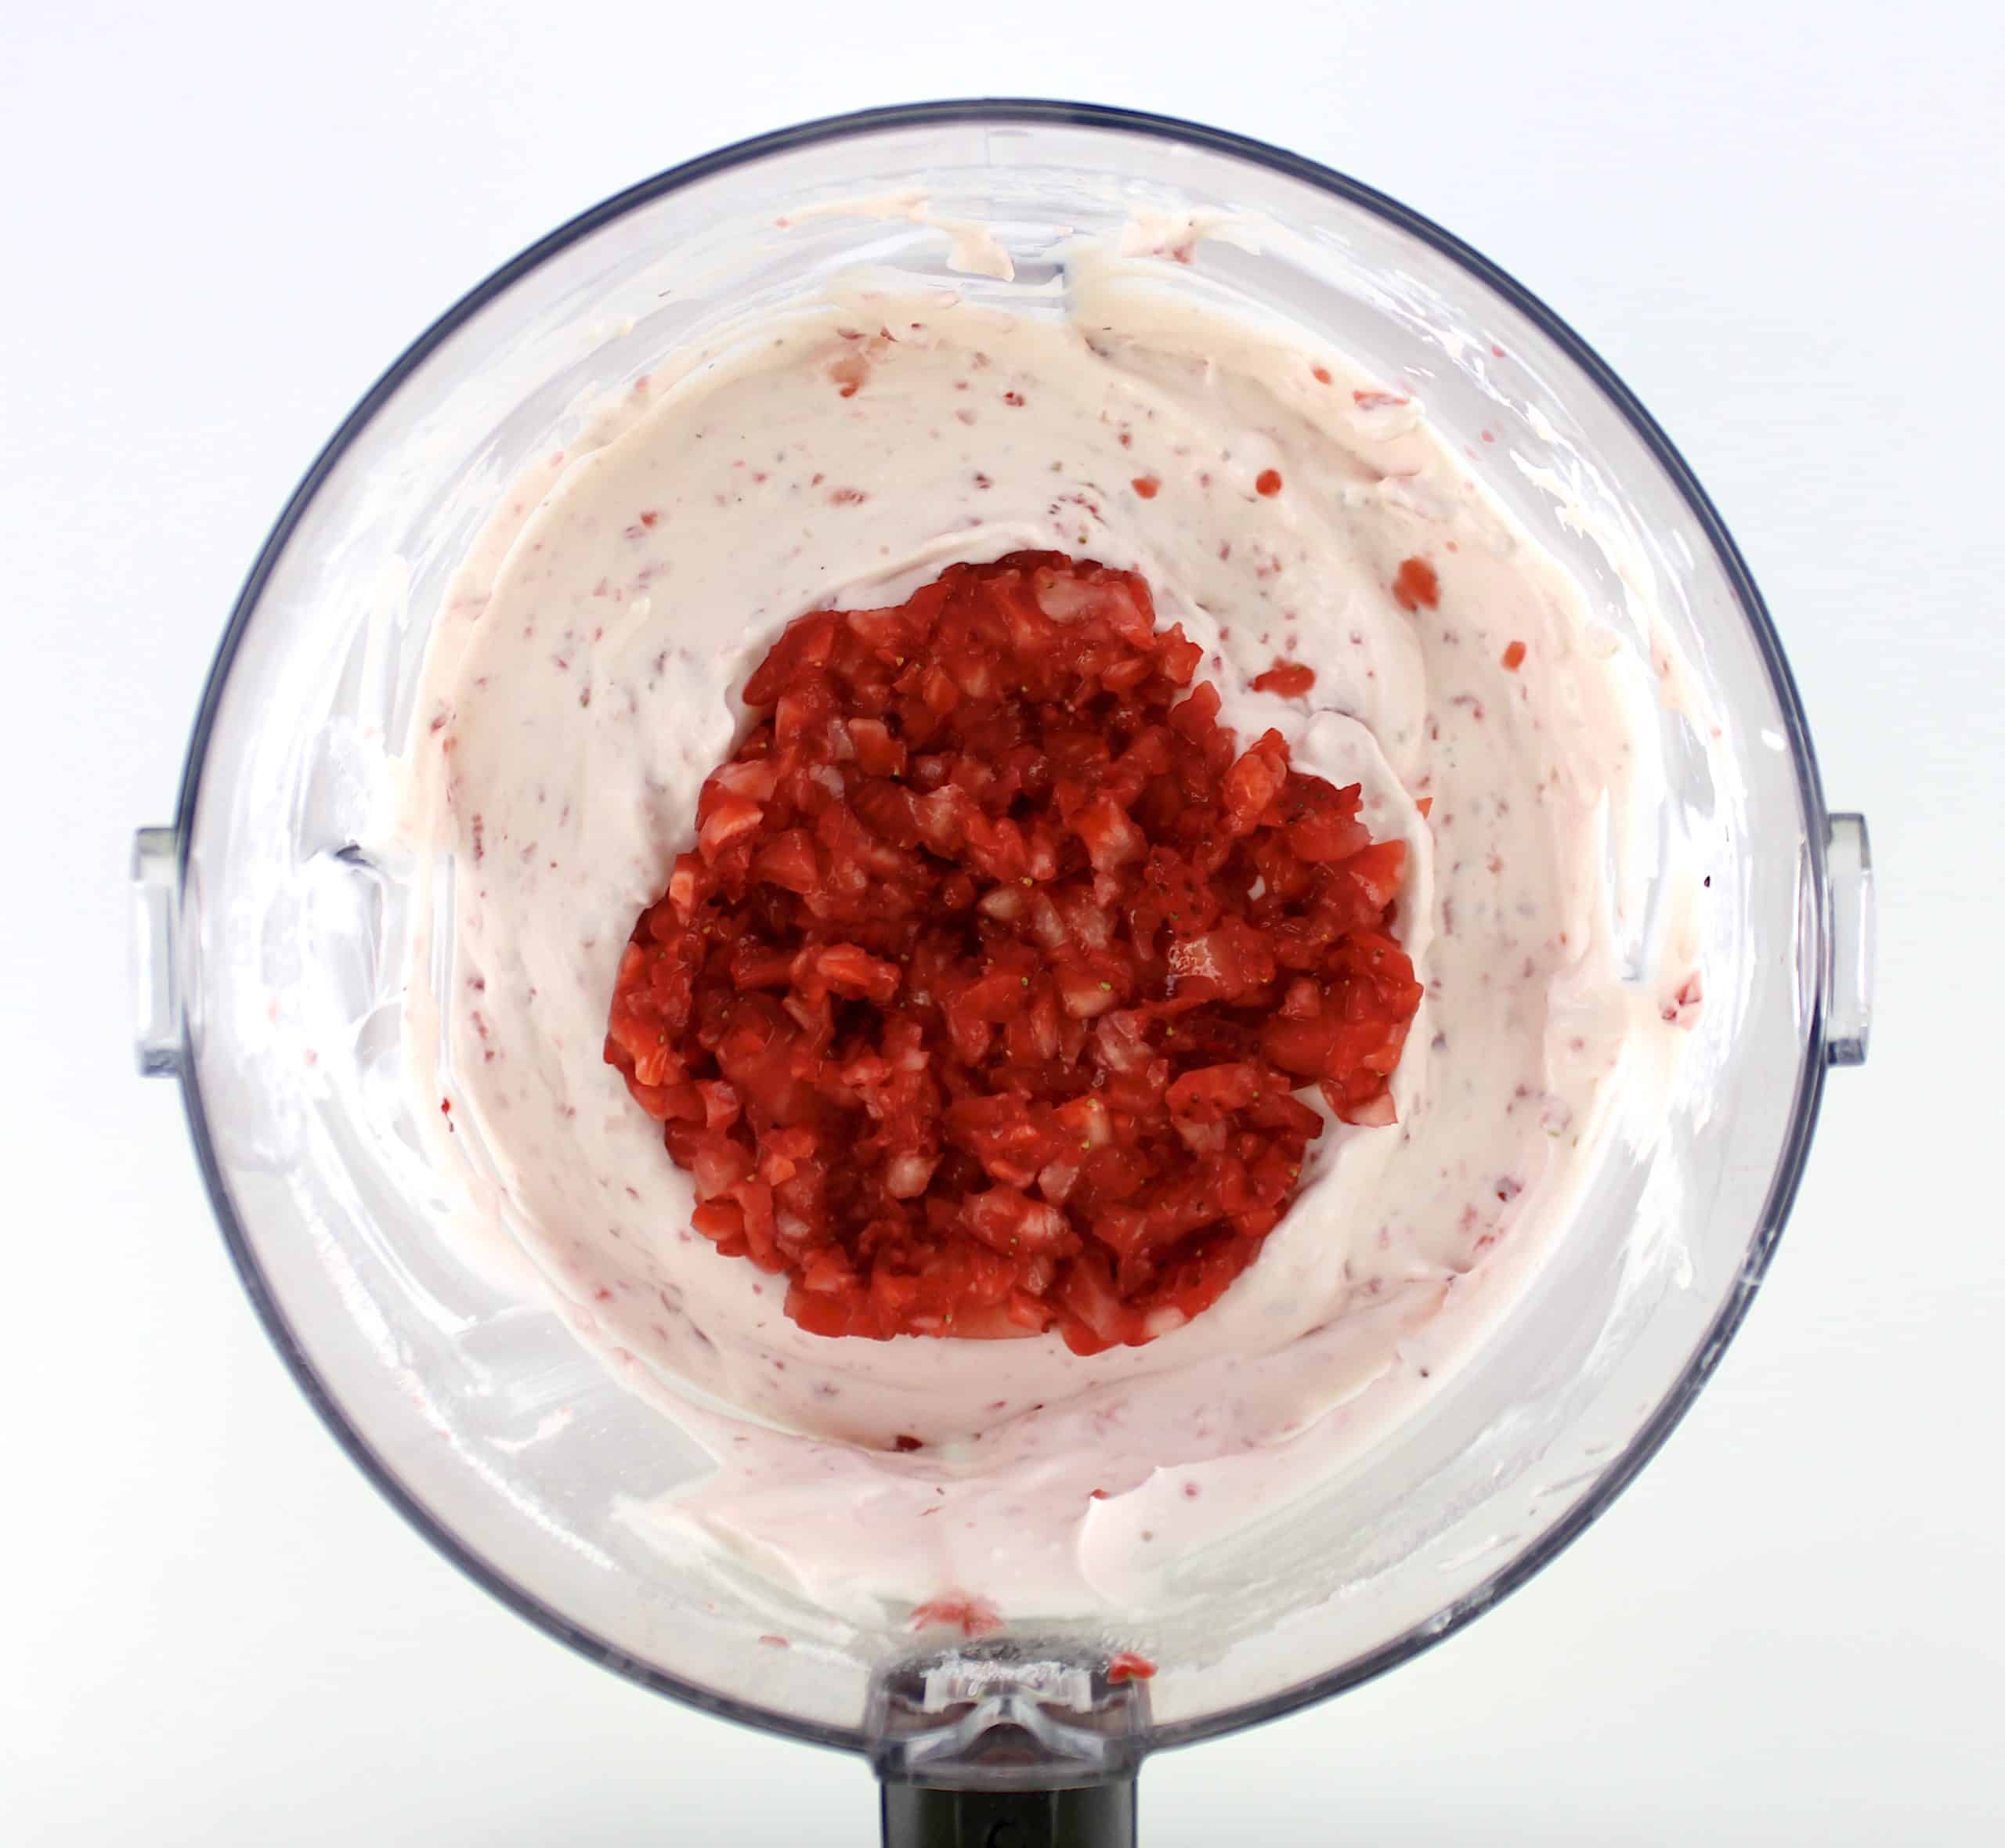 Keto Strawberry Cheesecake Popsicle ingredients in food processor with chopped strawberries on top